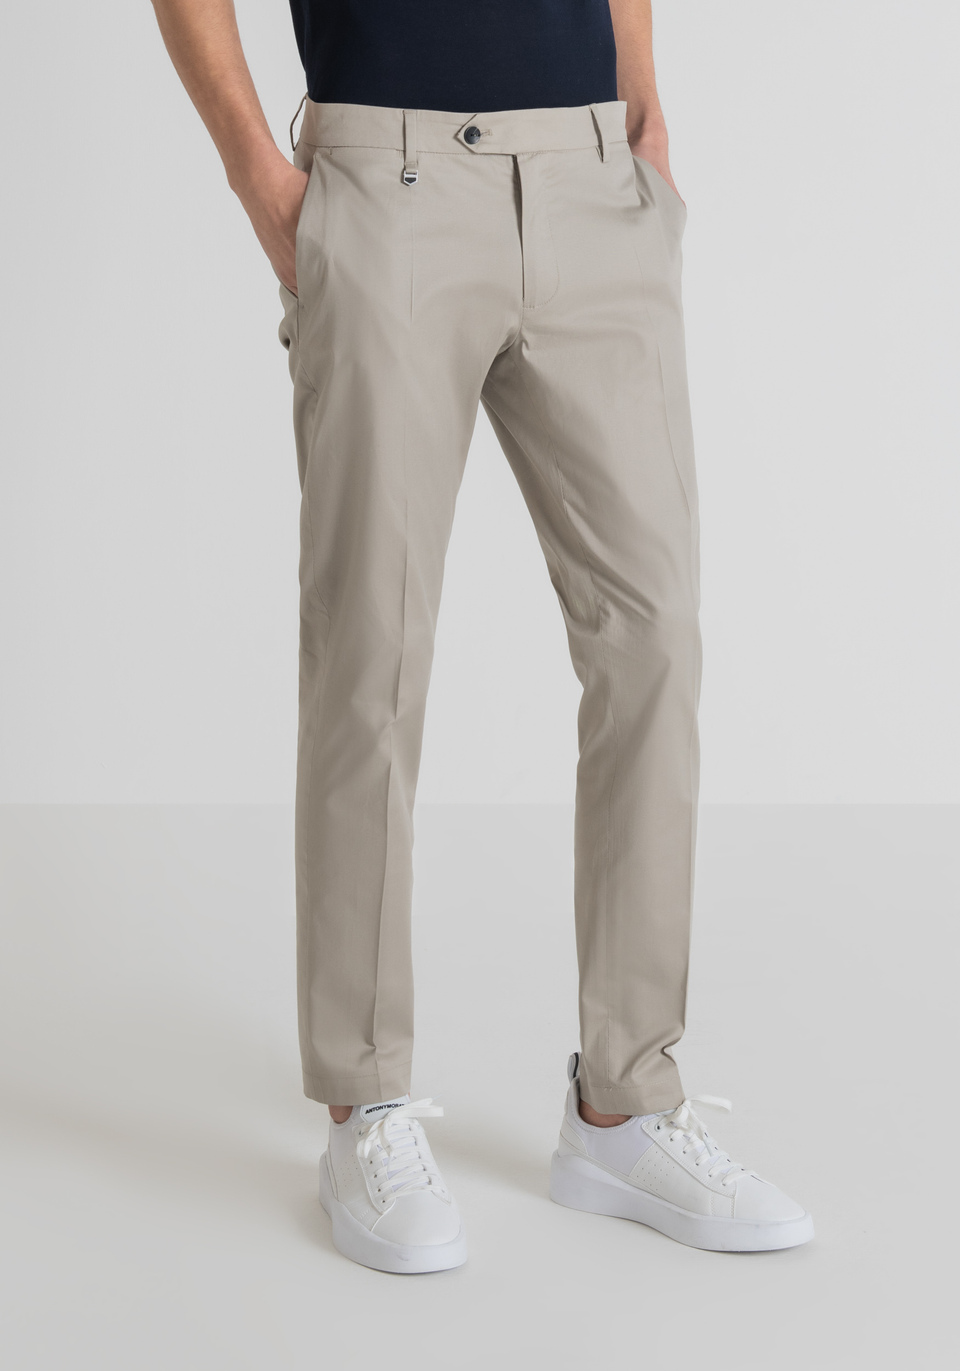 SKINNY-FIT “BRYAN” TROUSERS MADE FROM STRETCHY COTTON TWILL - Antony Morato Online Shop